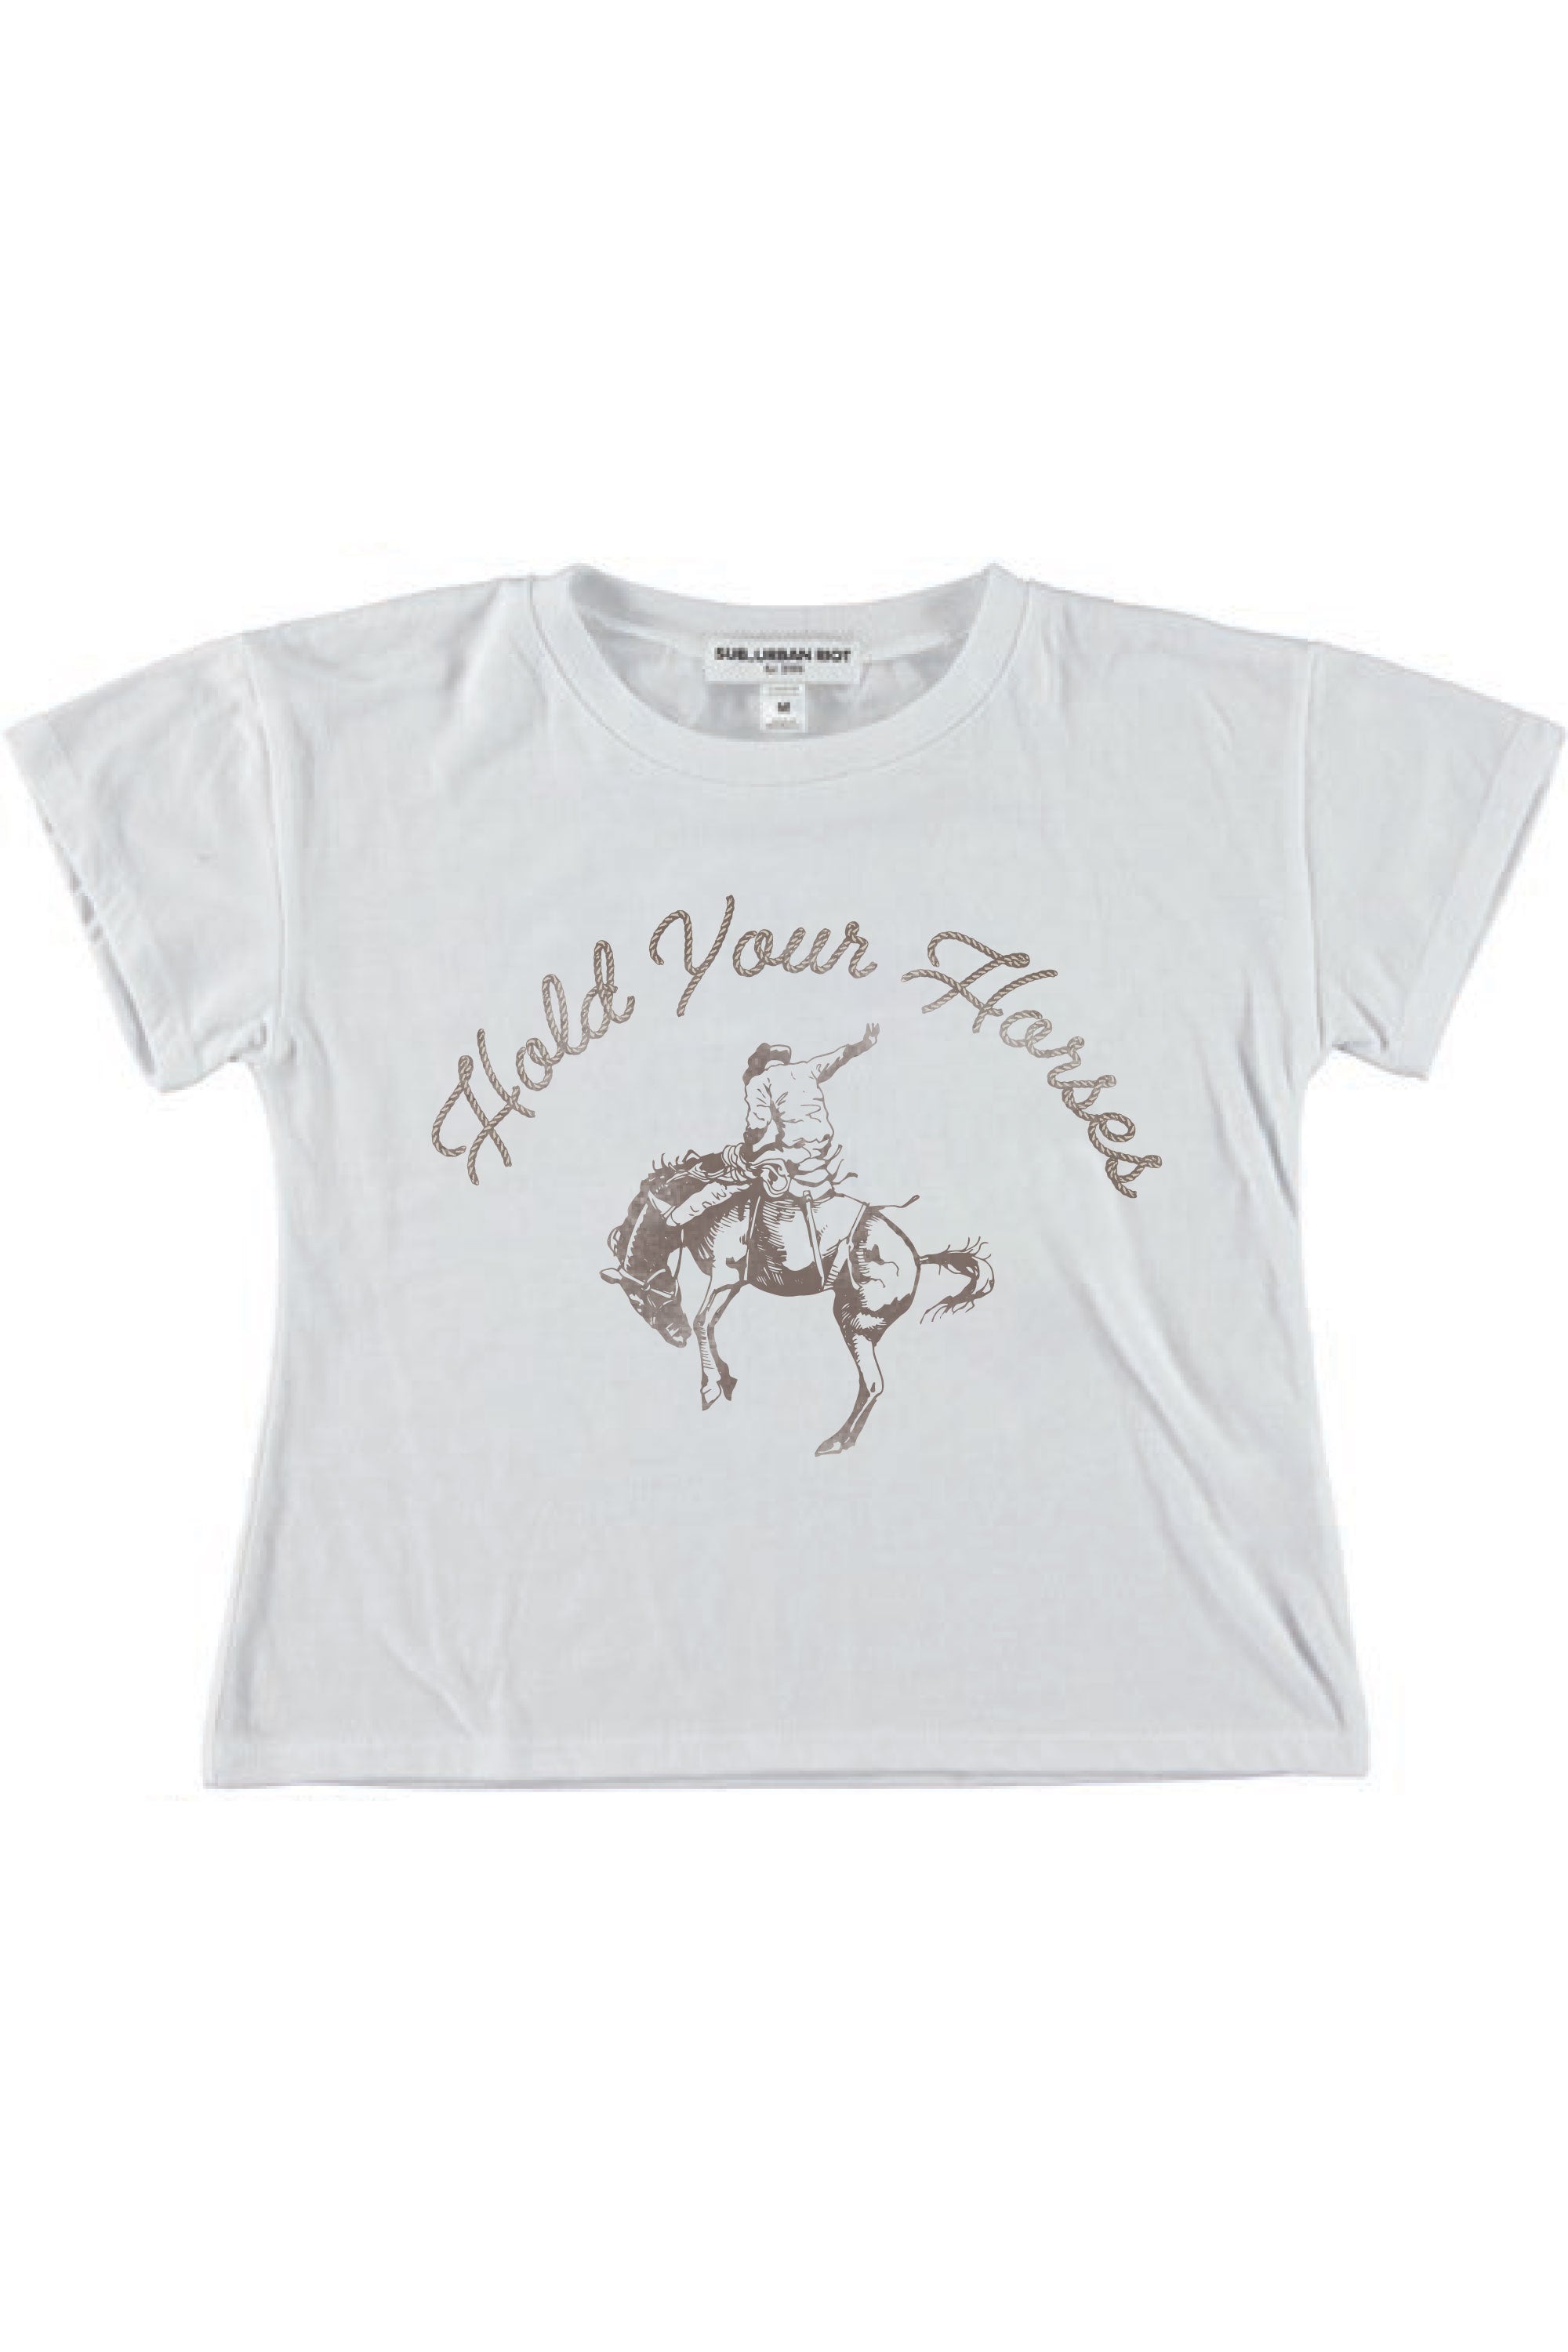 HOLD YOUR HORSES YOUTH SIZE CROP TEE